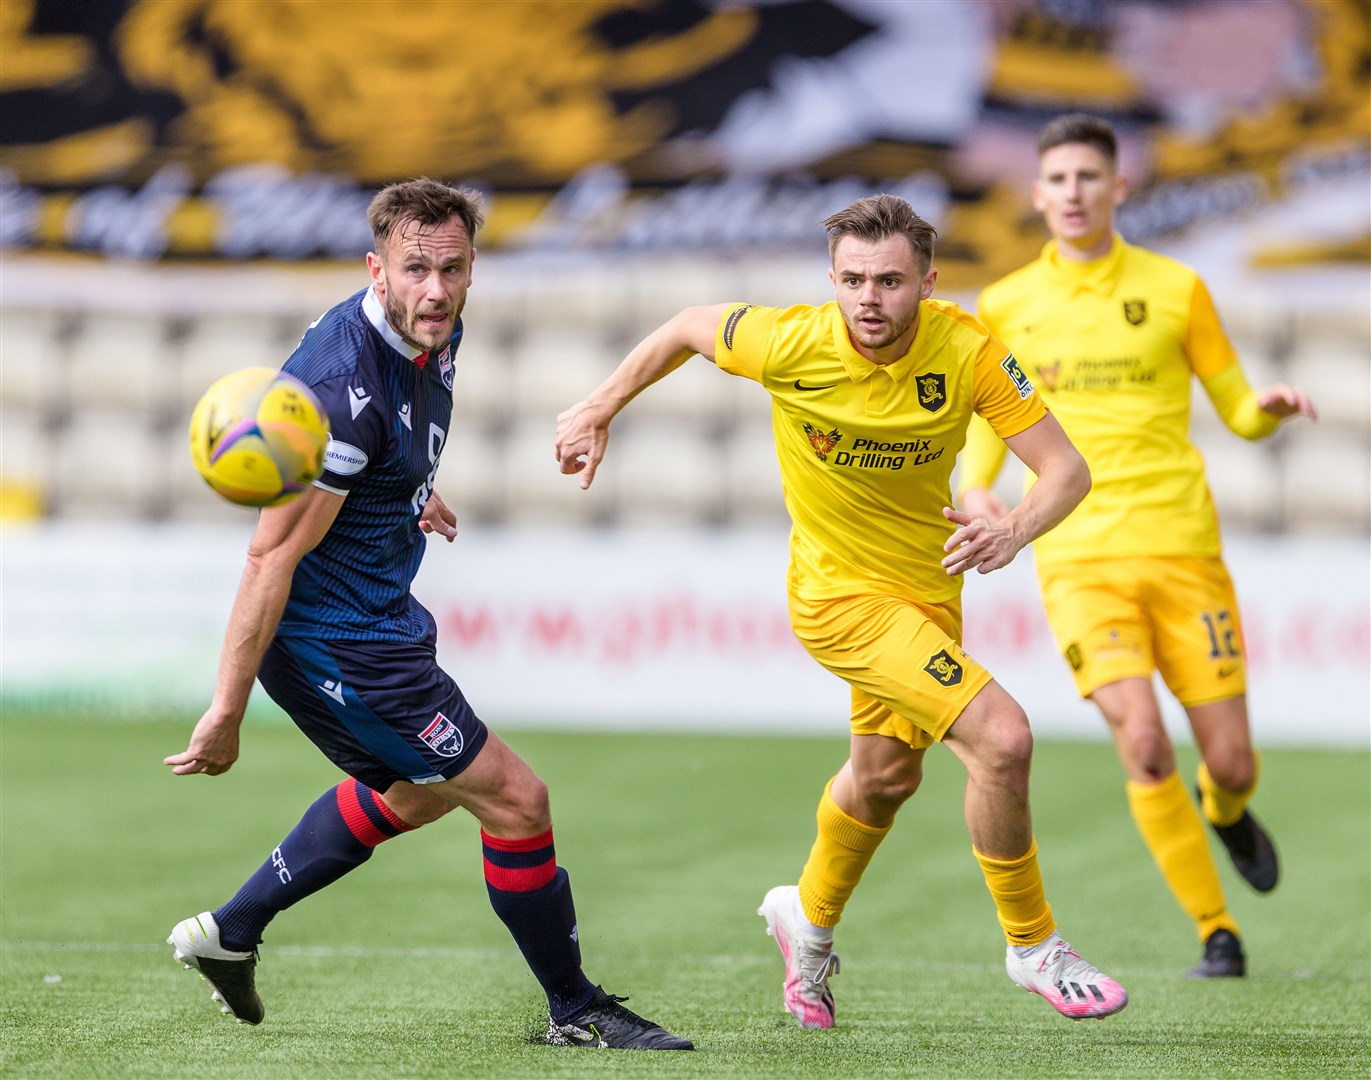 Picture - Ken Macpherson, Inverness. Livingston(1) v Ross County(0). 29.08.20. Ross County's Keith Watson tracks a run from Livingston's Alan Forrest.